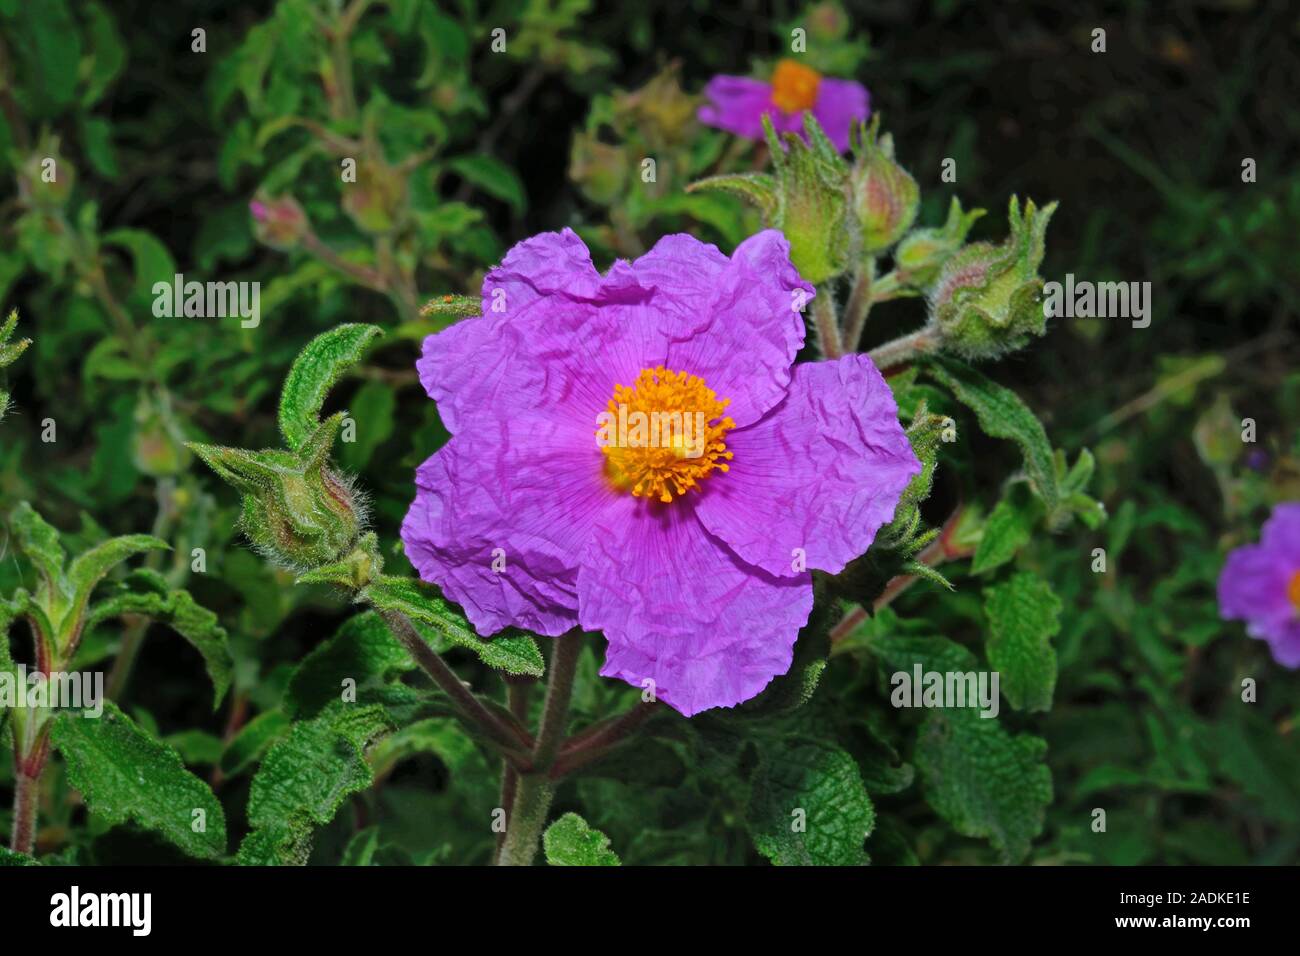 Cistus creticus (pink rock-rose) is widespread in open woodland, maquis and phrygana in the central and eastern Mediterranean. Stock Photo